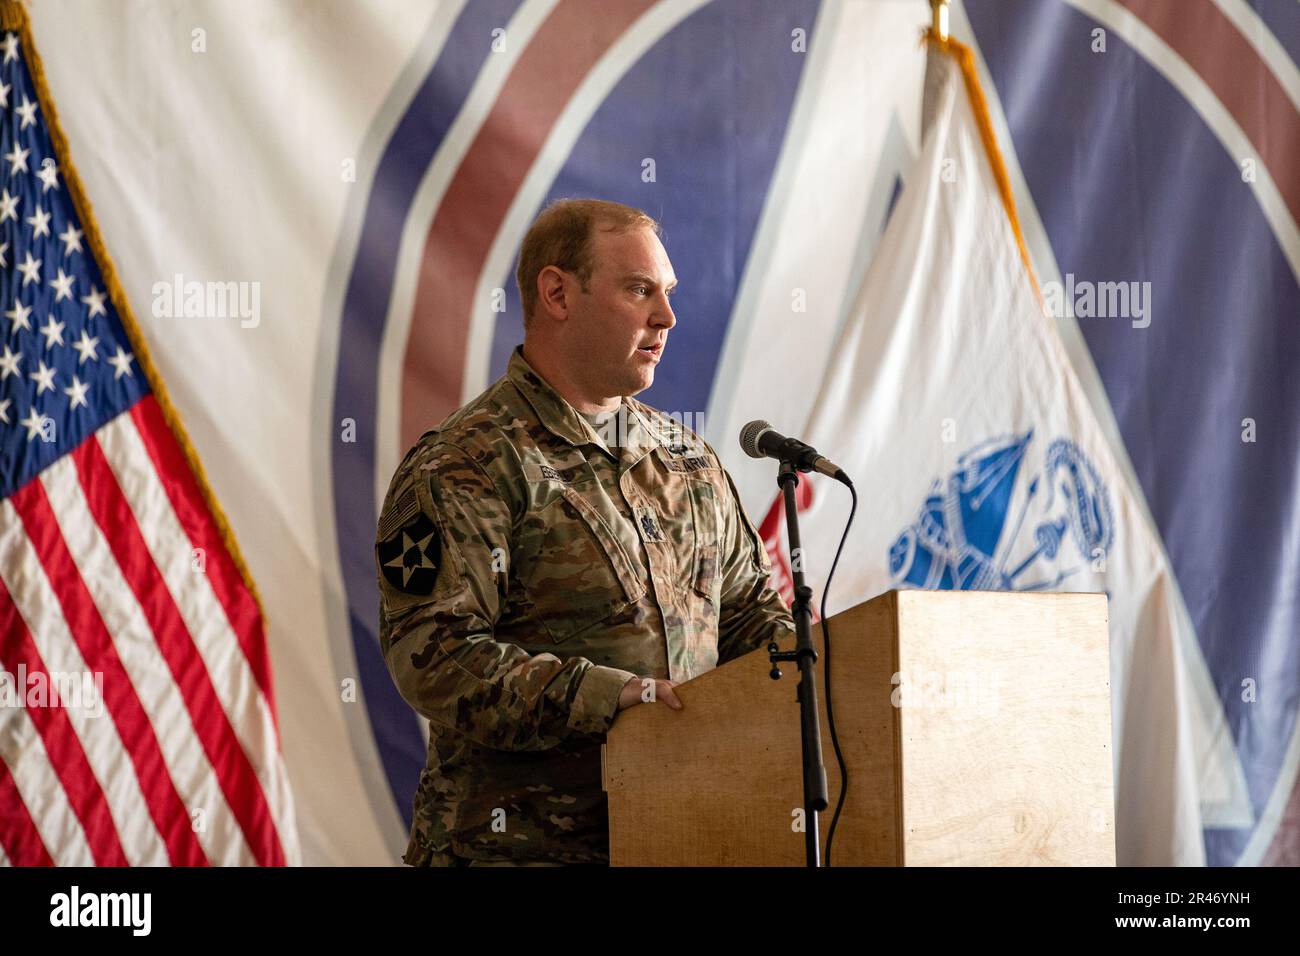 U.S. Army Lt. Col. Scott Eberle, the commander of the 382nd Combat Sustainment Support Battalion, speaks to the attendees during a ceremony in which the 336th CSSB transferred authority to the 382nd CSSB. These battalions are subordinate to the 369th Sustainment Brigade while forward deployed to the CENTCOM area of operations. Stock Photo